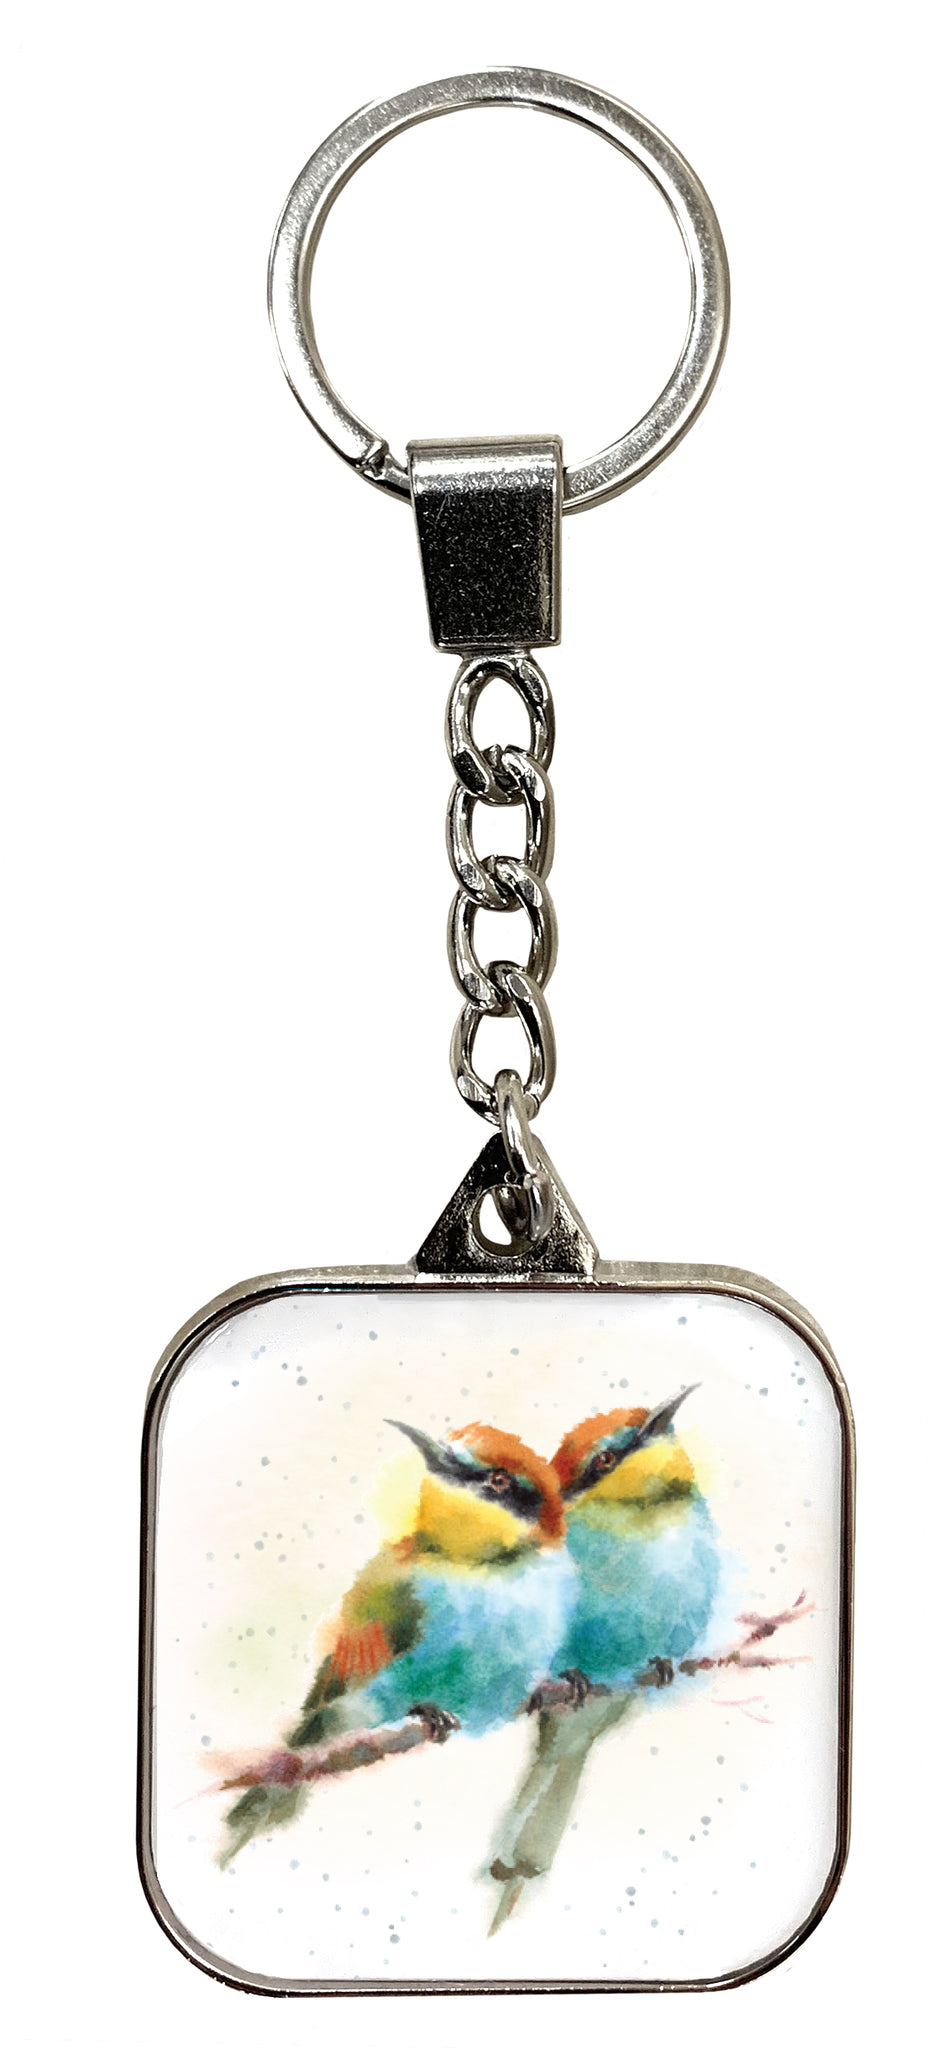 Hopper Studios Key Chain - Lucy and Lewis the Lovebirds